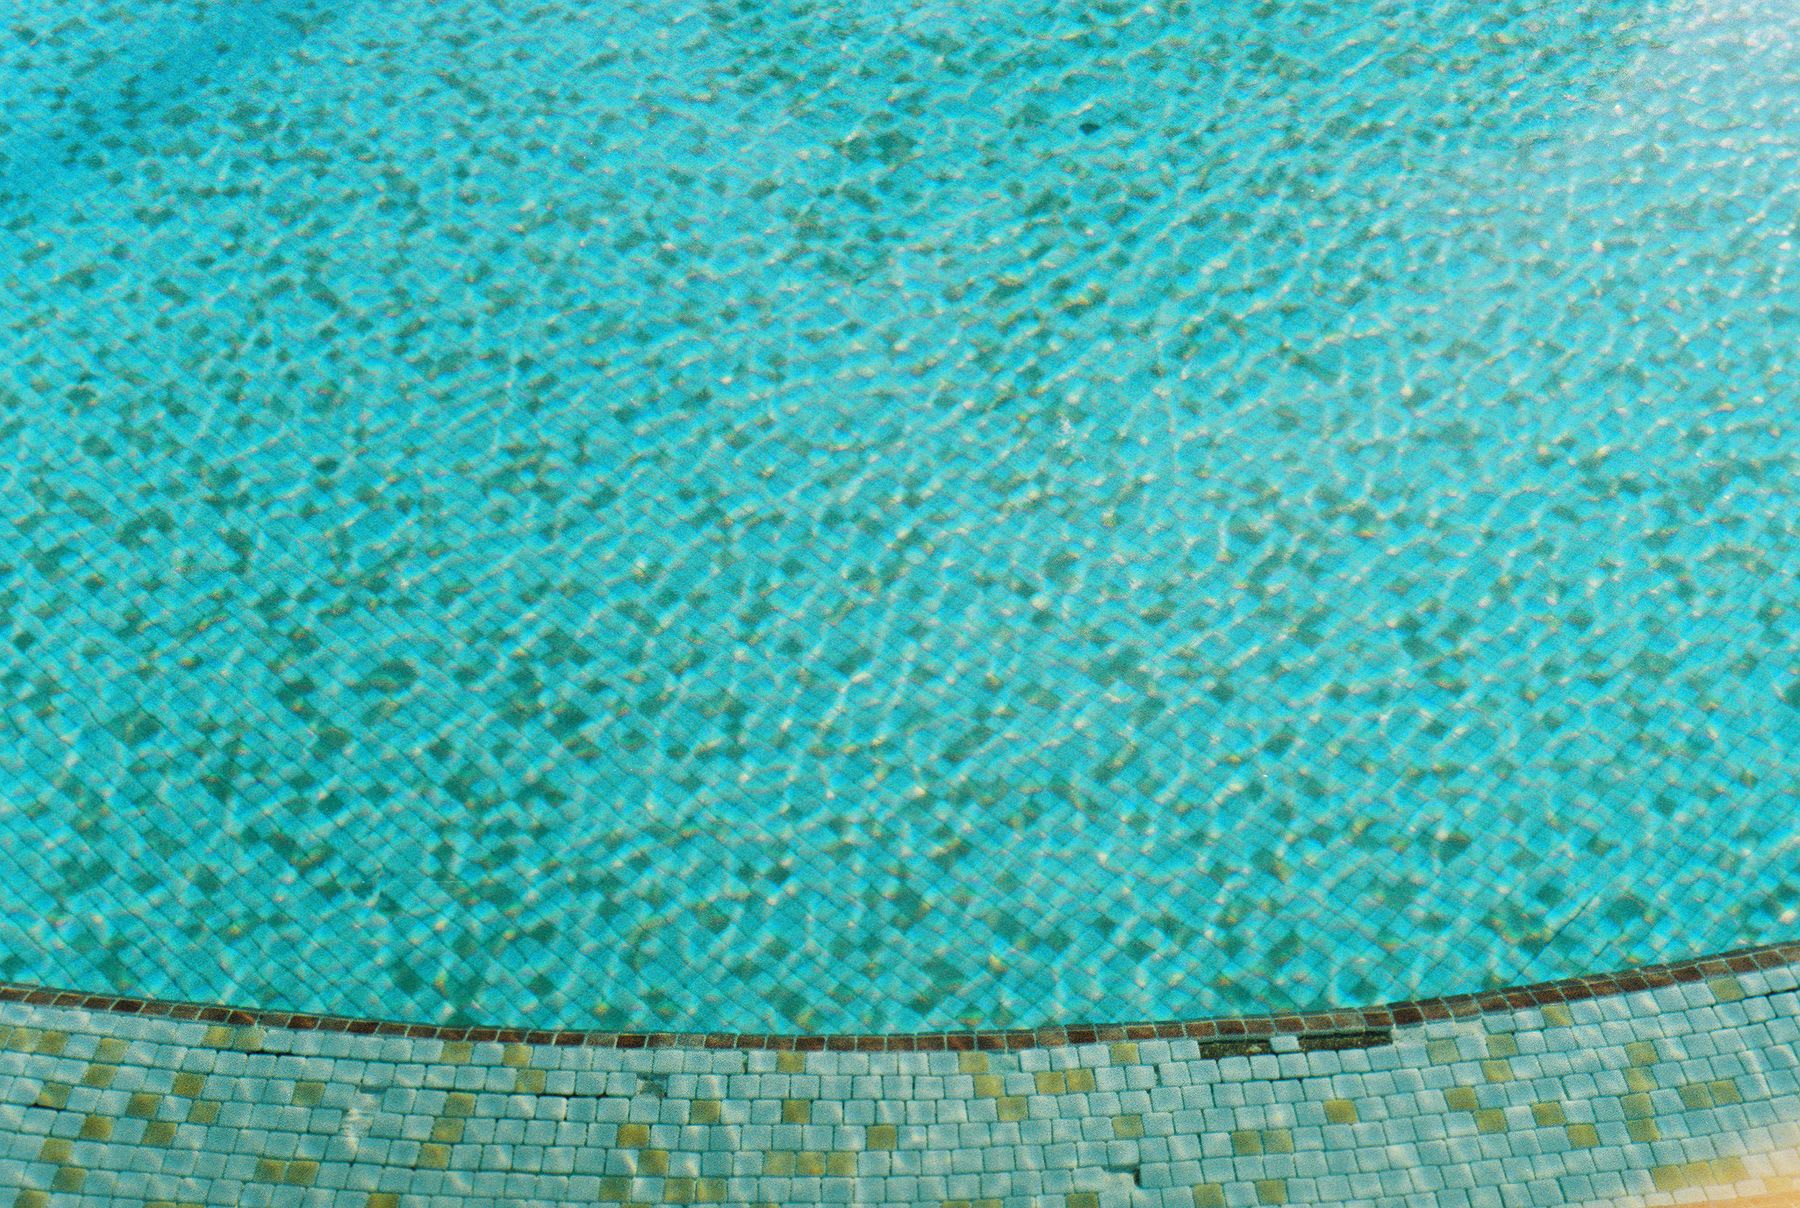 a large swimming pool with tiled floor